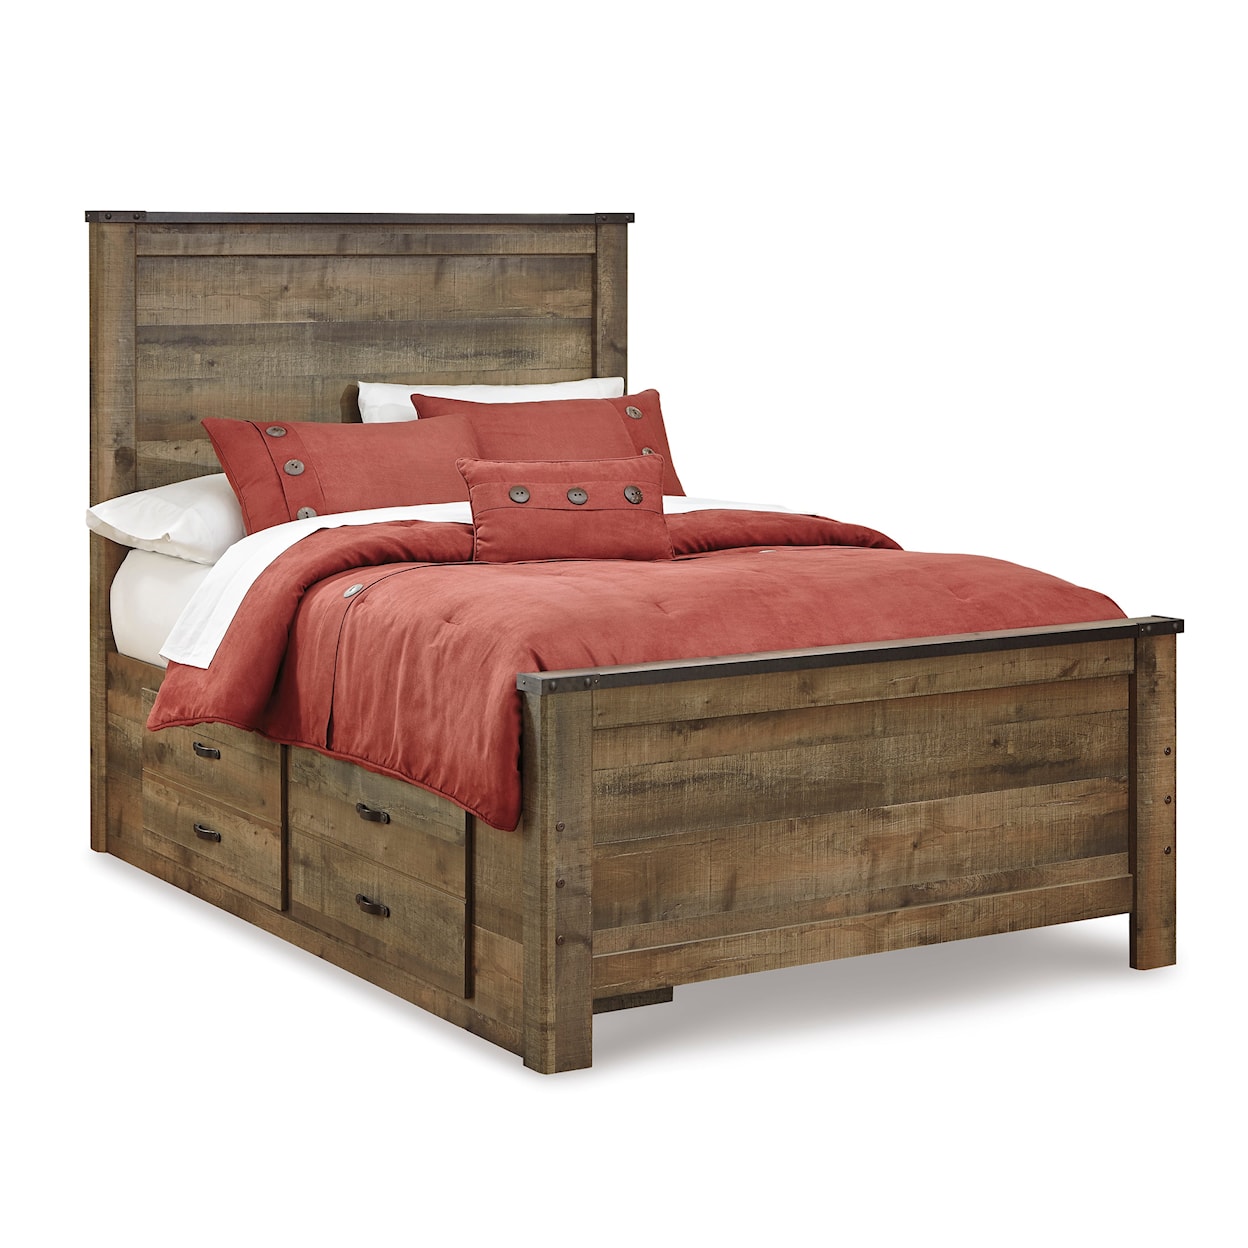 Signature Design by Ashley Furniture Trinell Full Panel Bed with 2 Storage Drawers